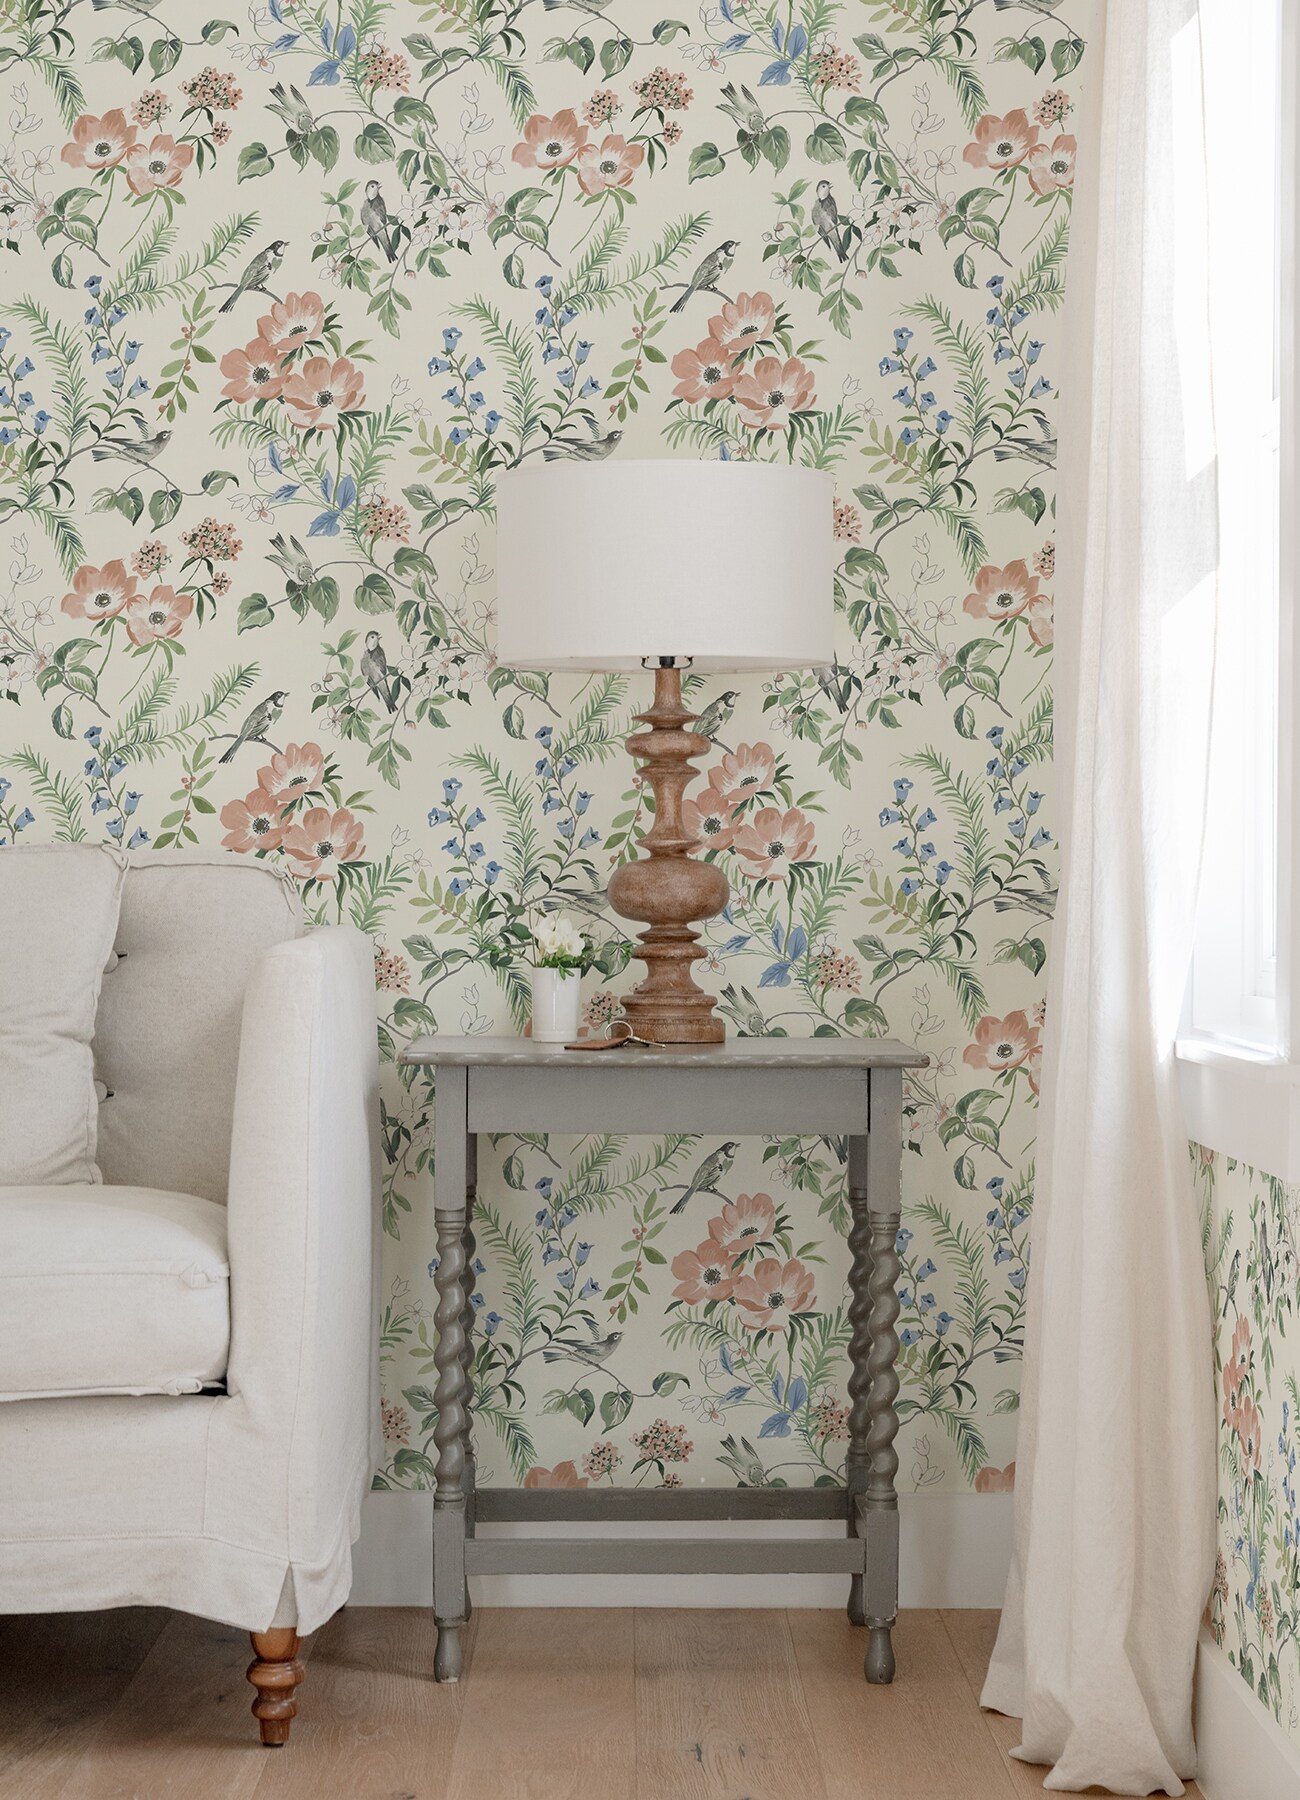 Chesapeake Frederique Mint Floral Wallpaper, 20.5-in by 33-ft, 56.38 sq. ft.